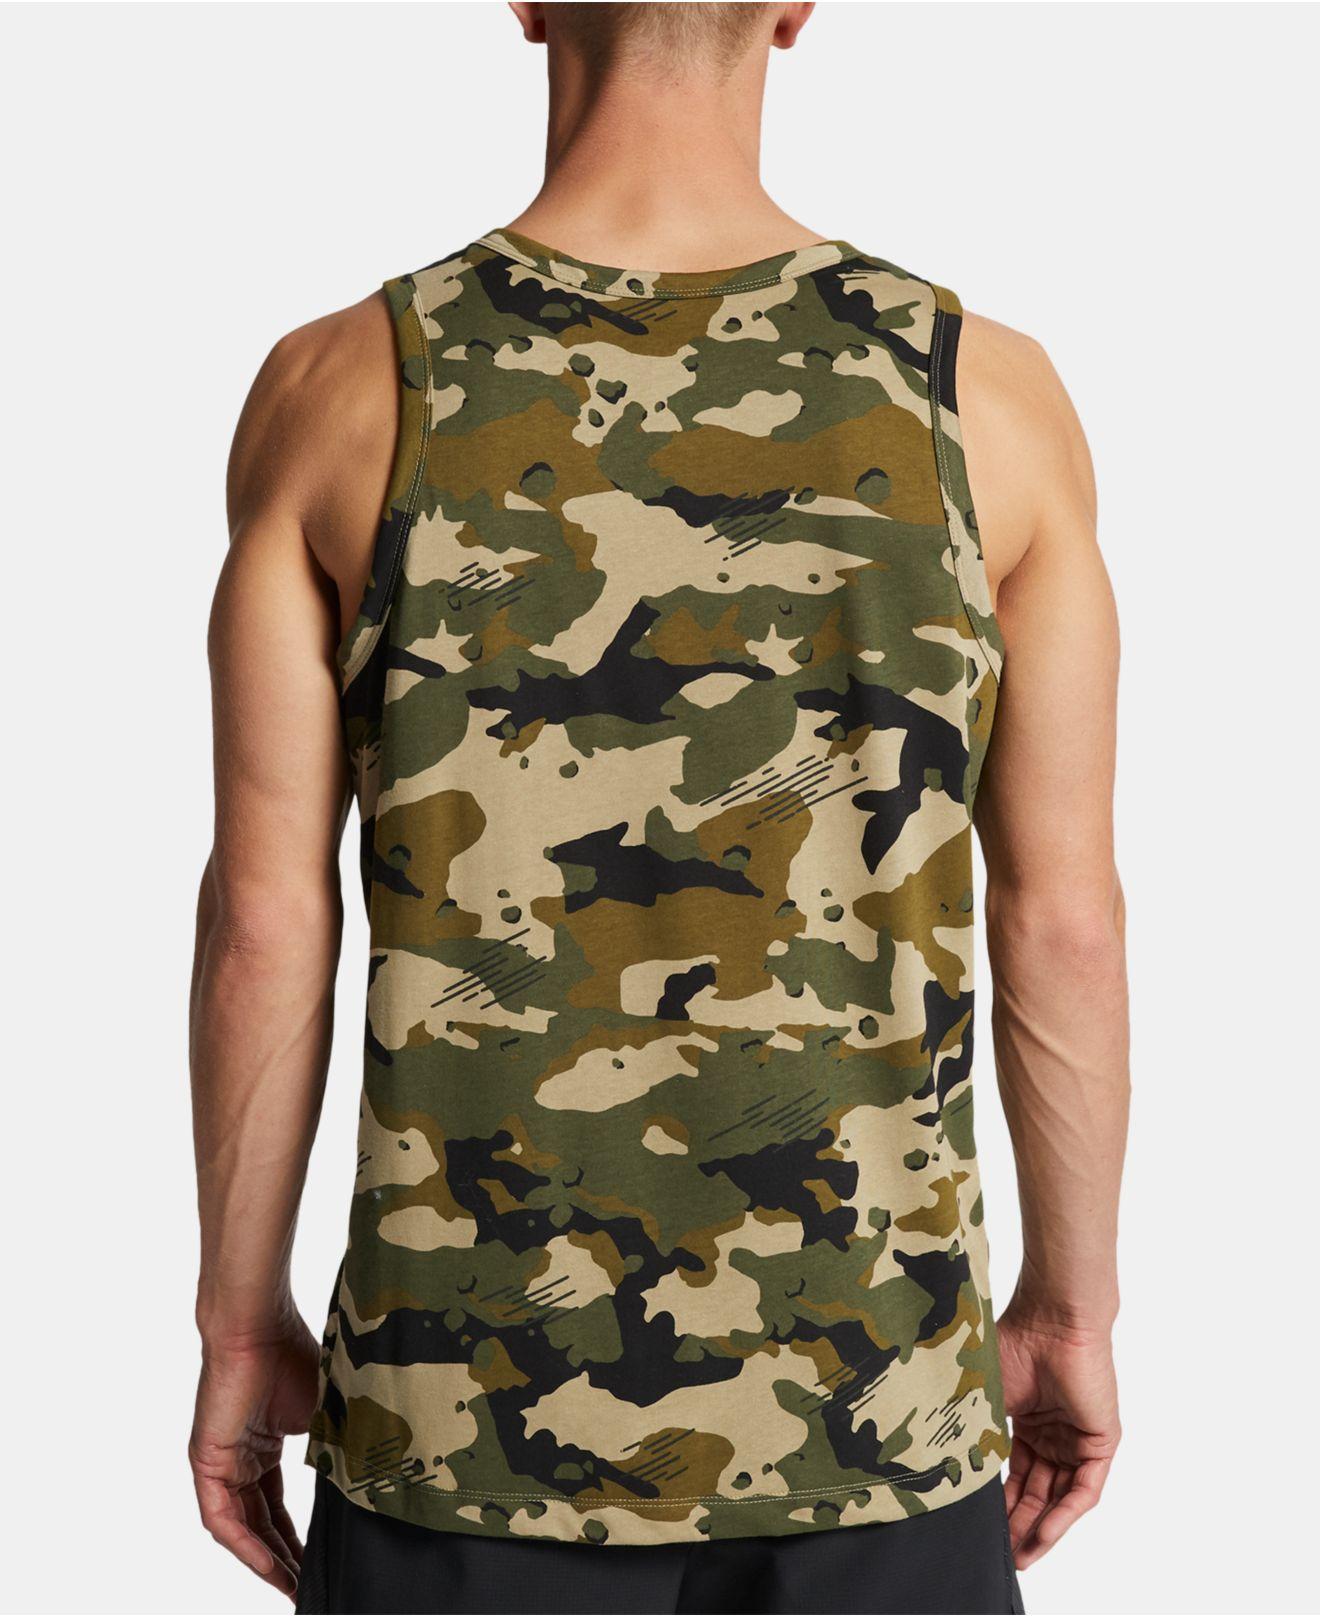 Nike Dri-fit Camo Training Tank Top in Olive (Green) for Men - Lyst